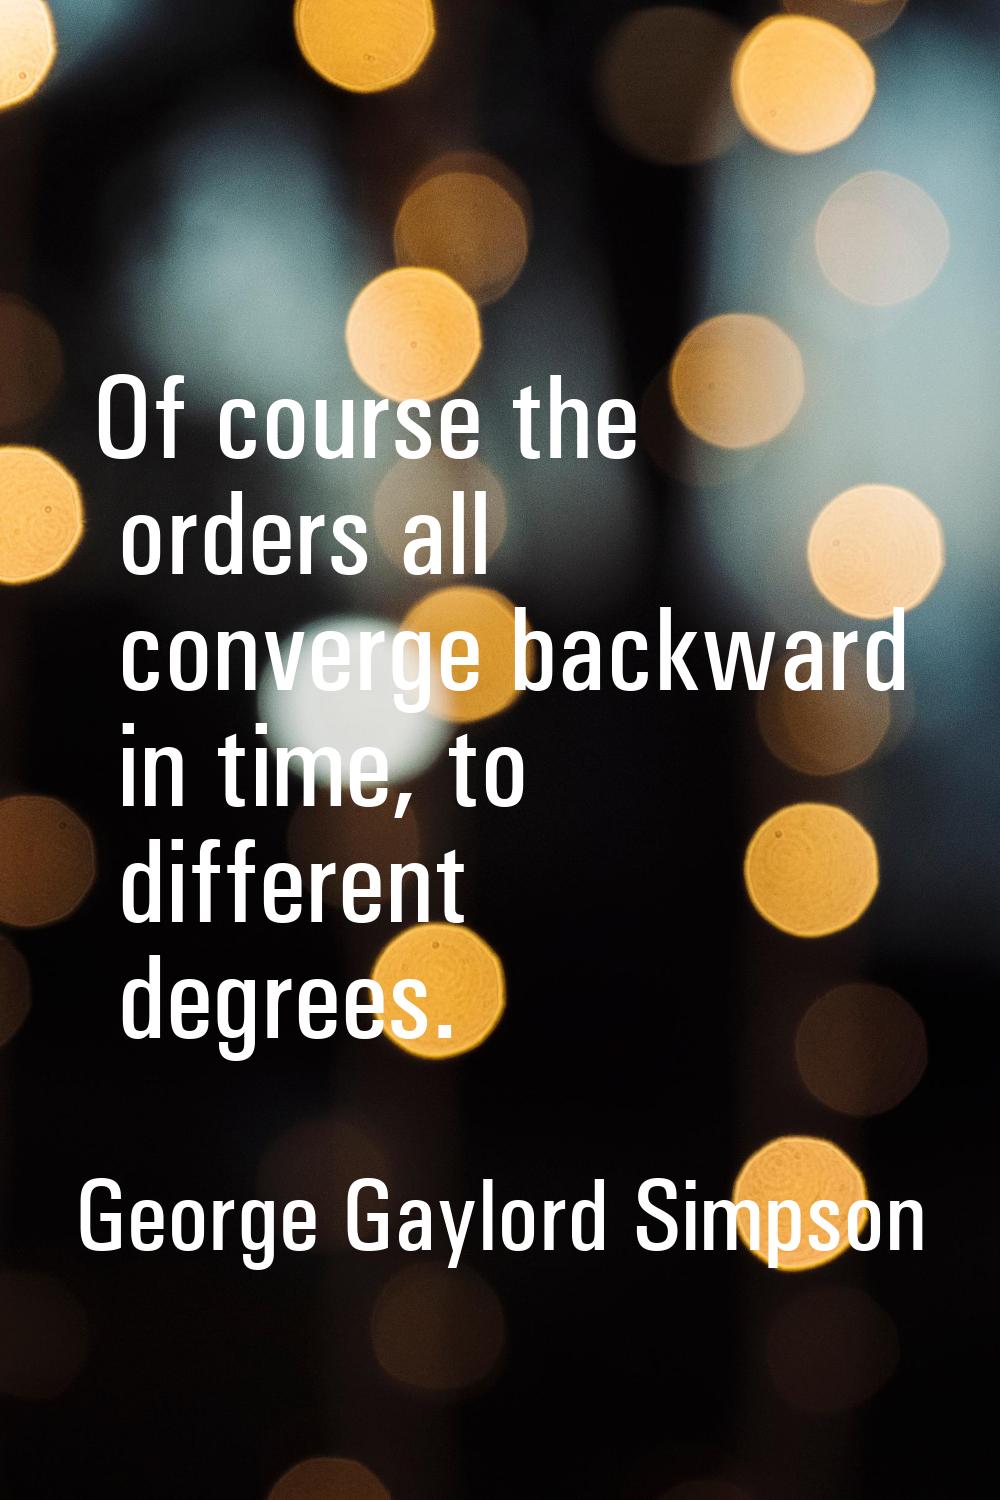 Of course the orders all converge backward in time, to different degrees.